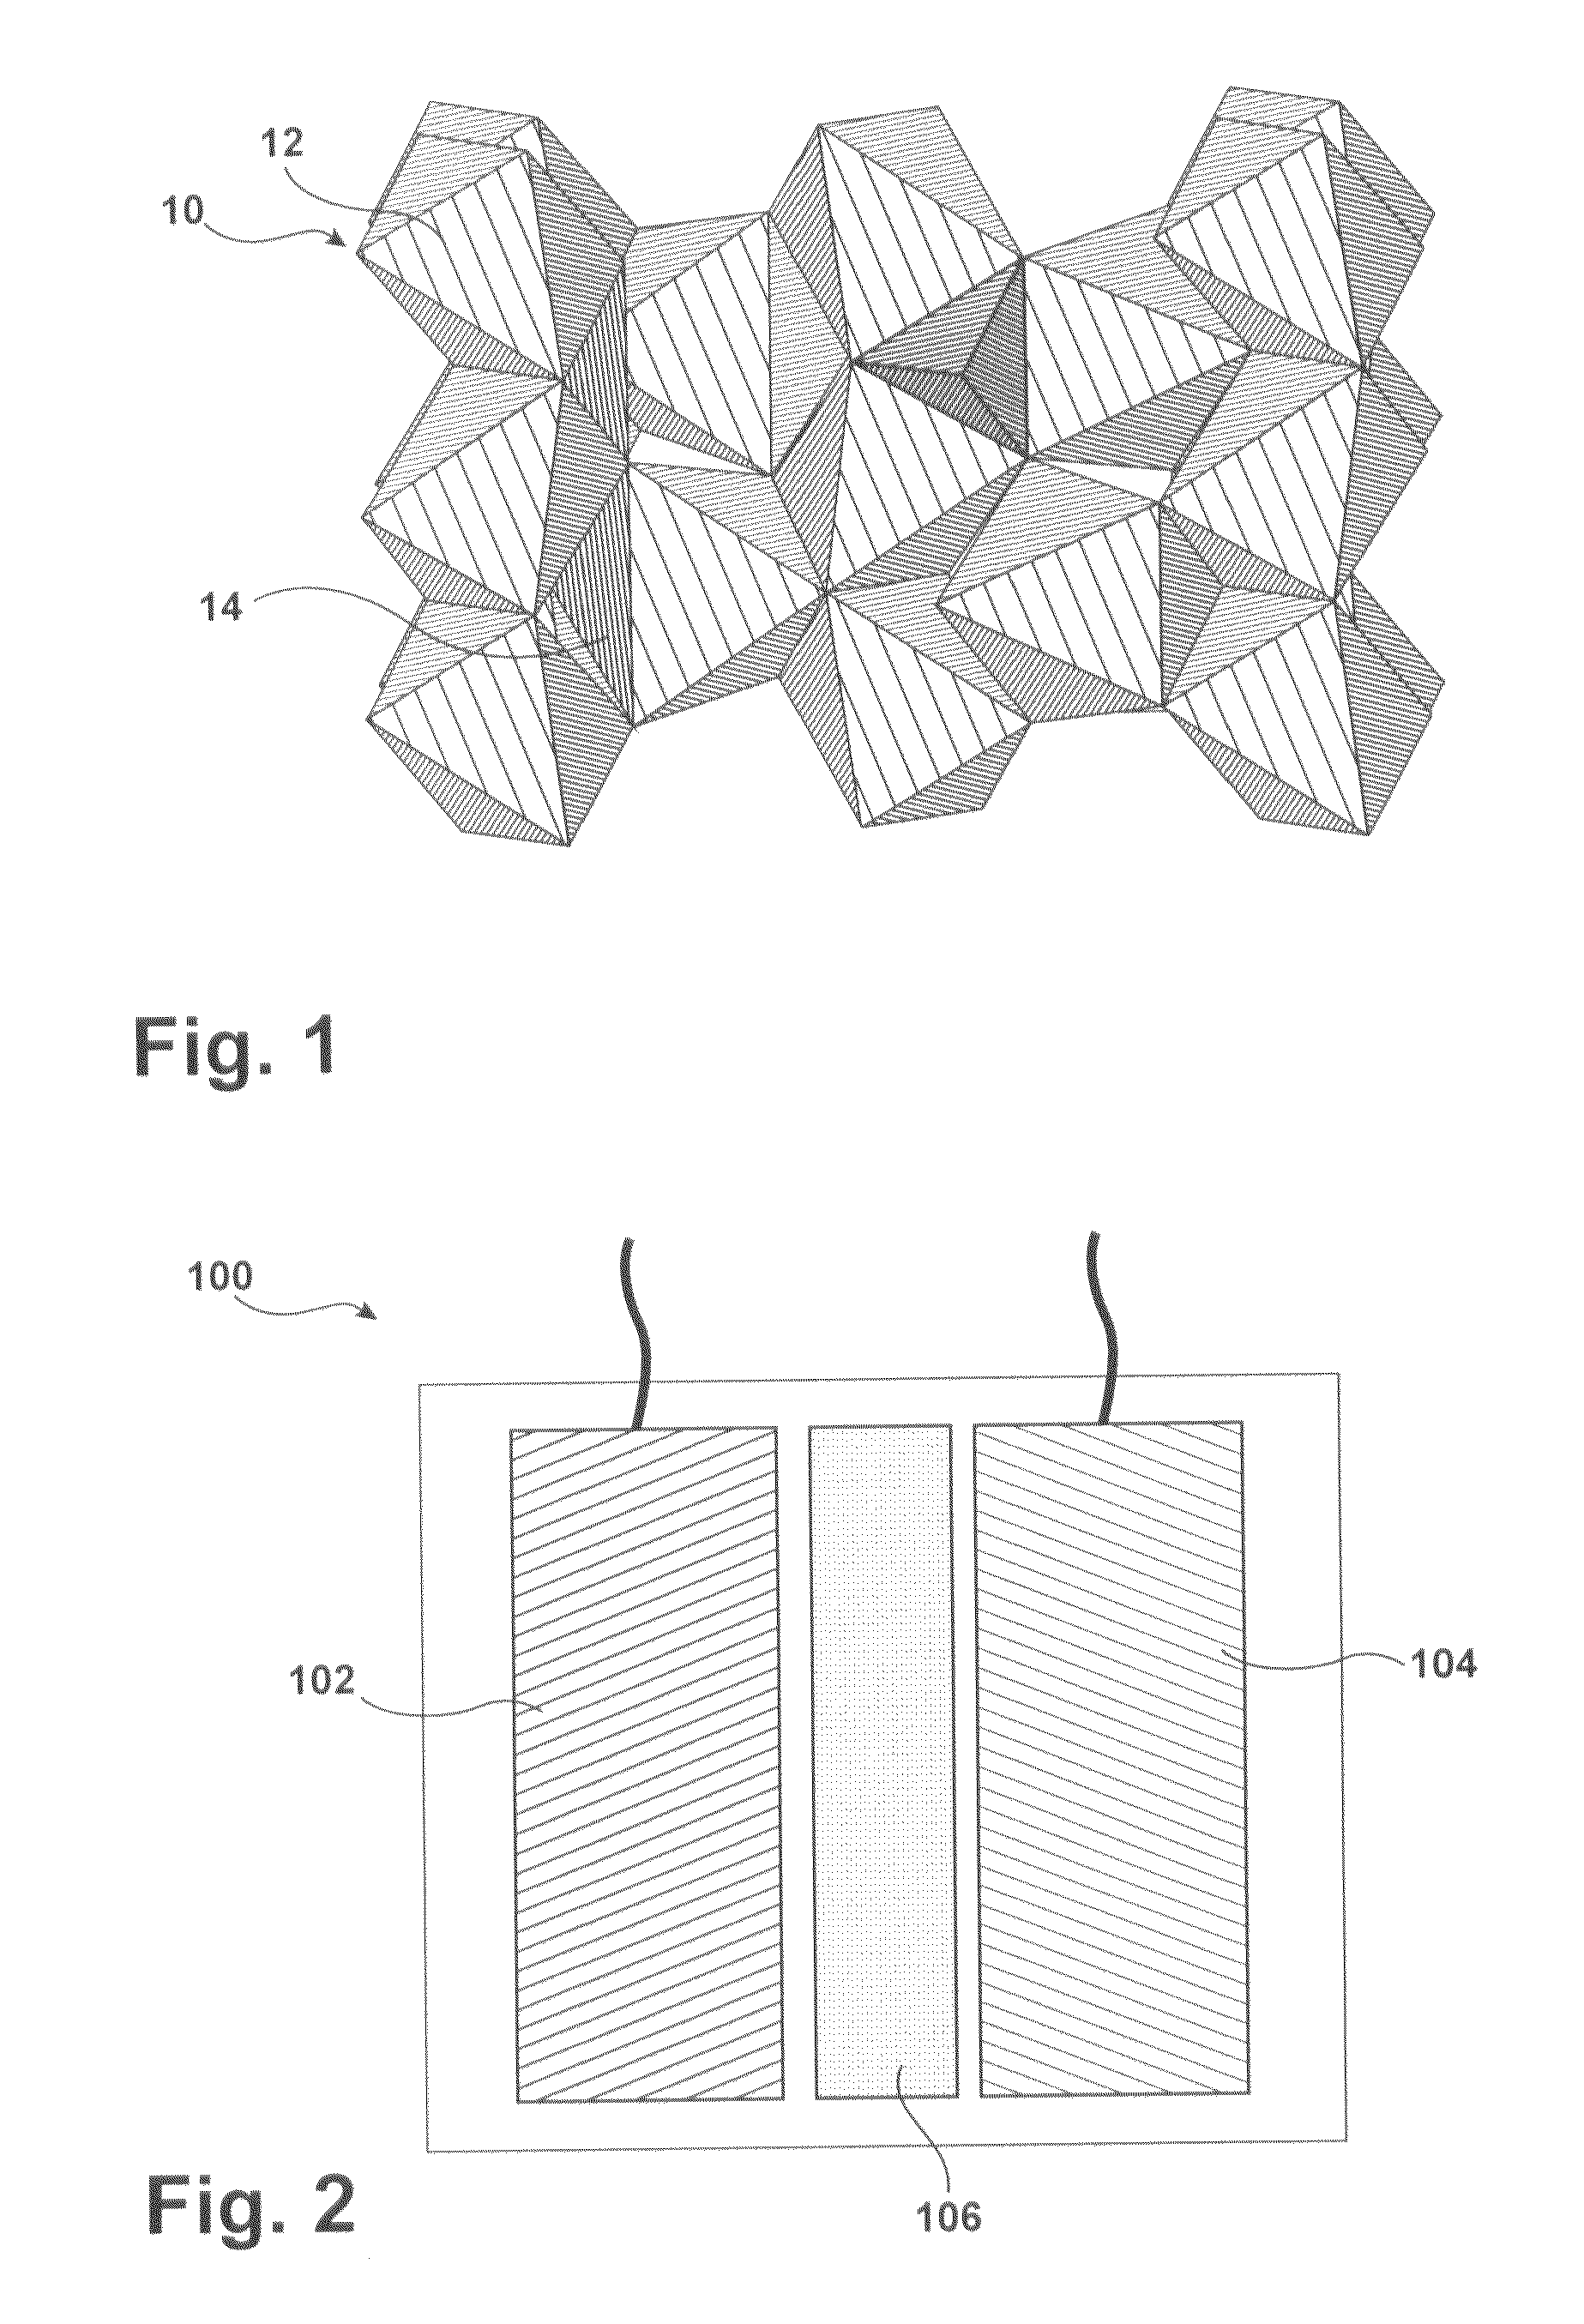 Lithium battery with silicon-based anode and silicate-based cathode